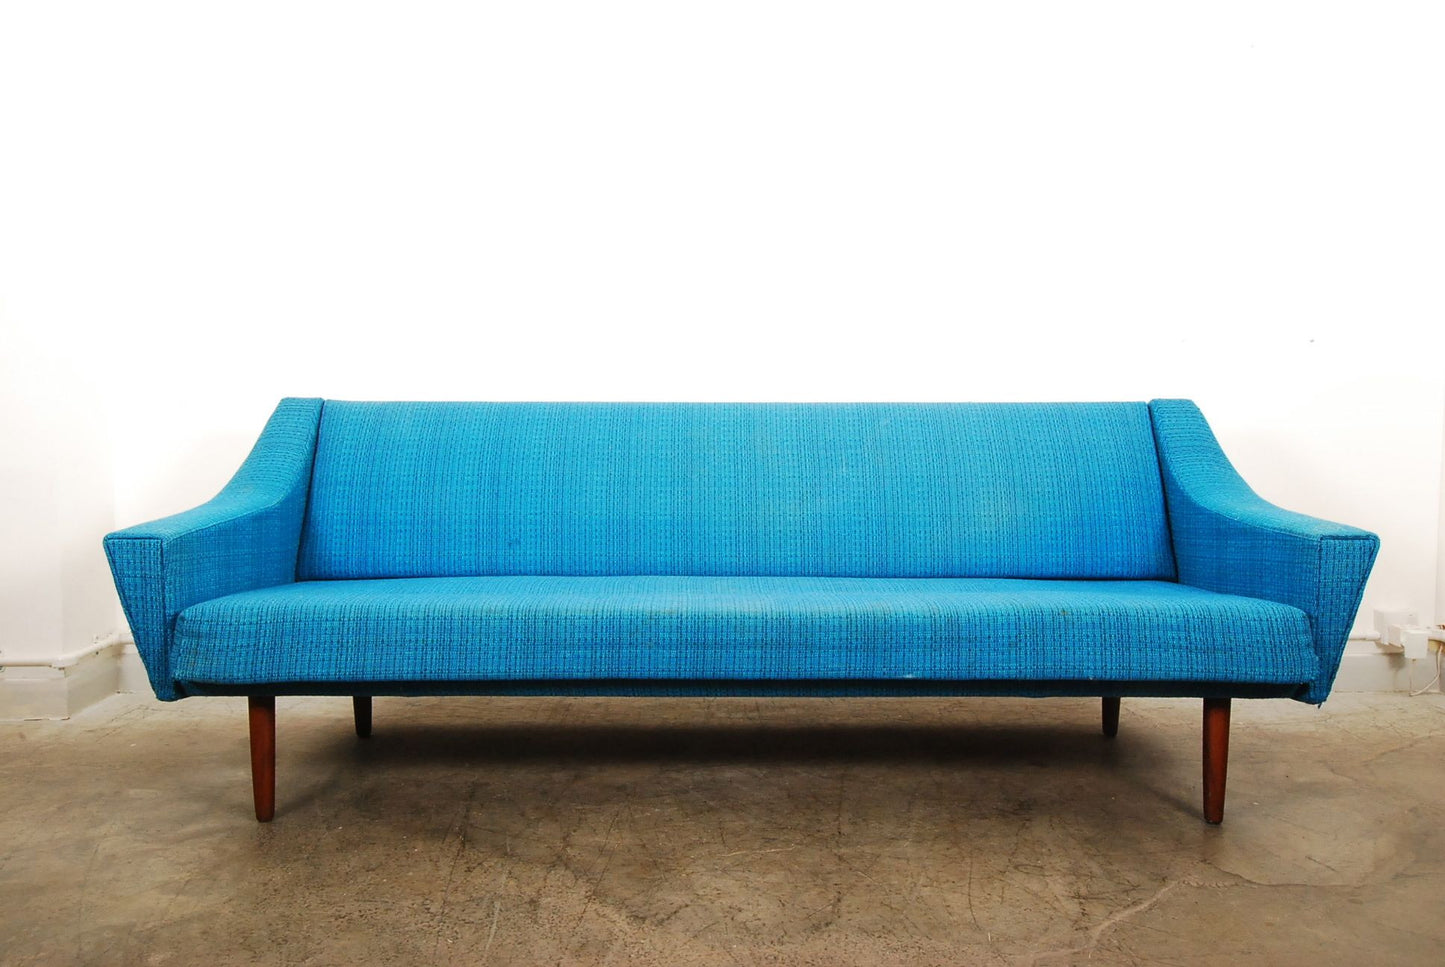 Three seat sofa / daybed